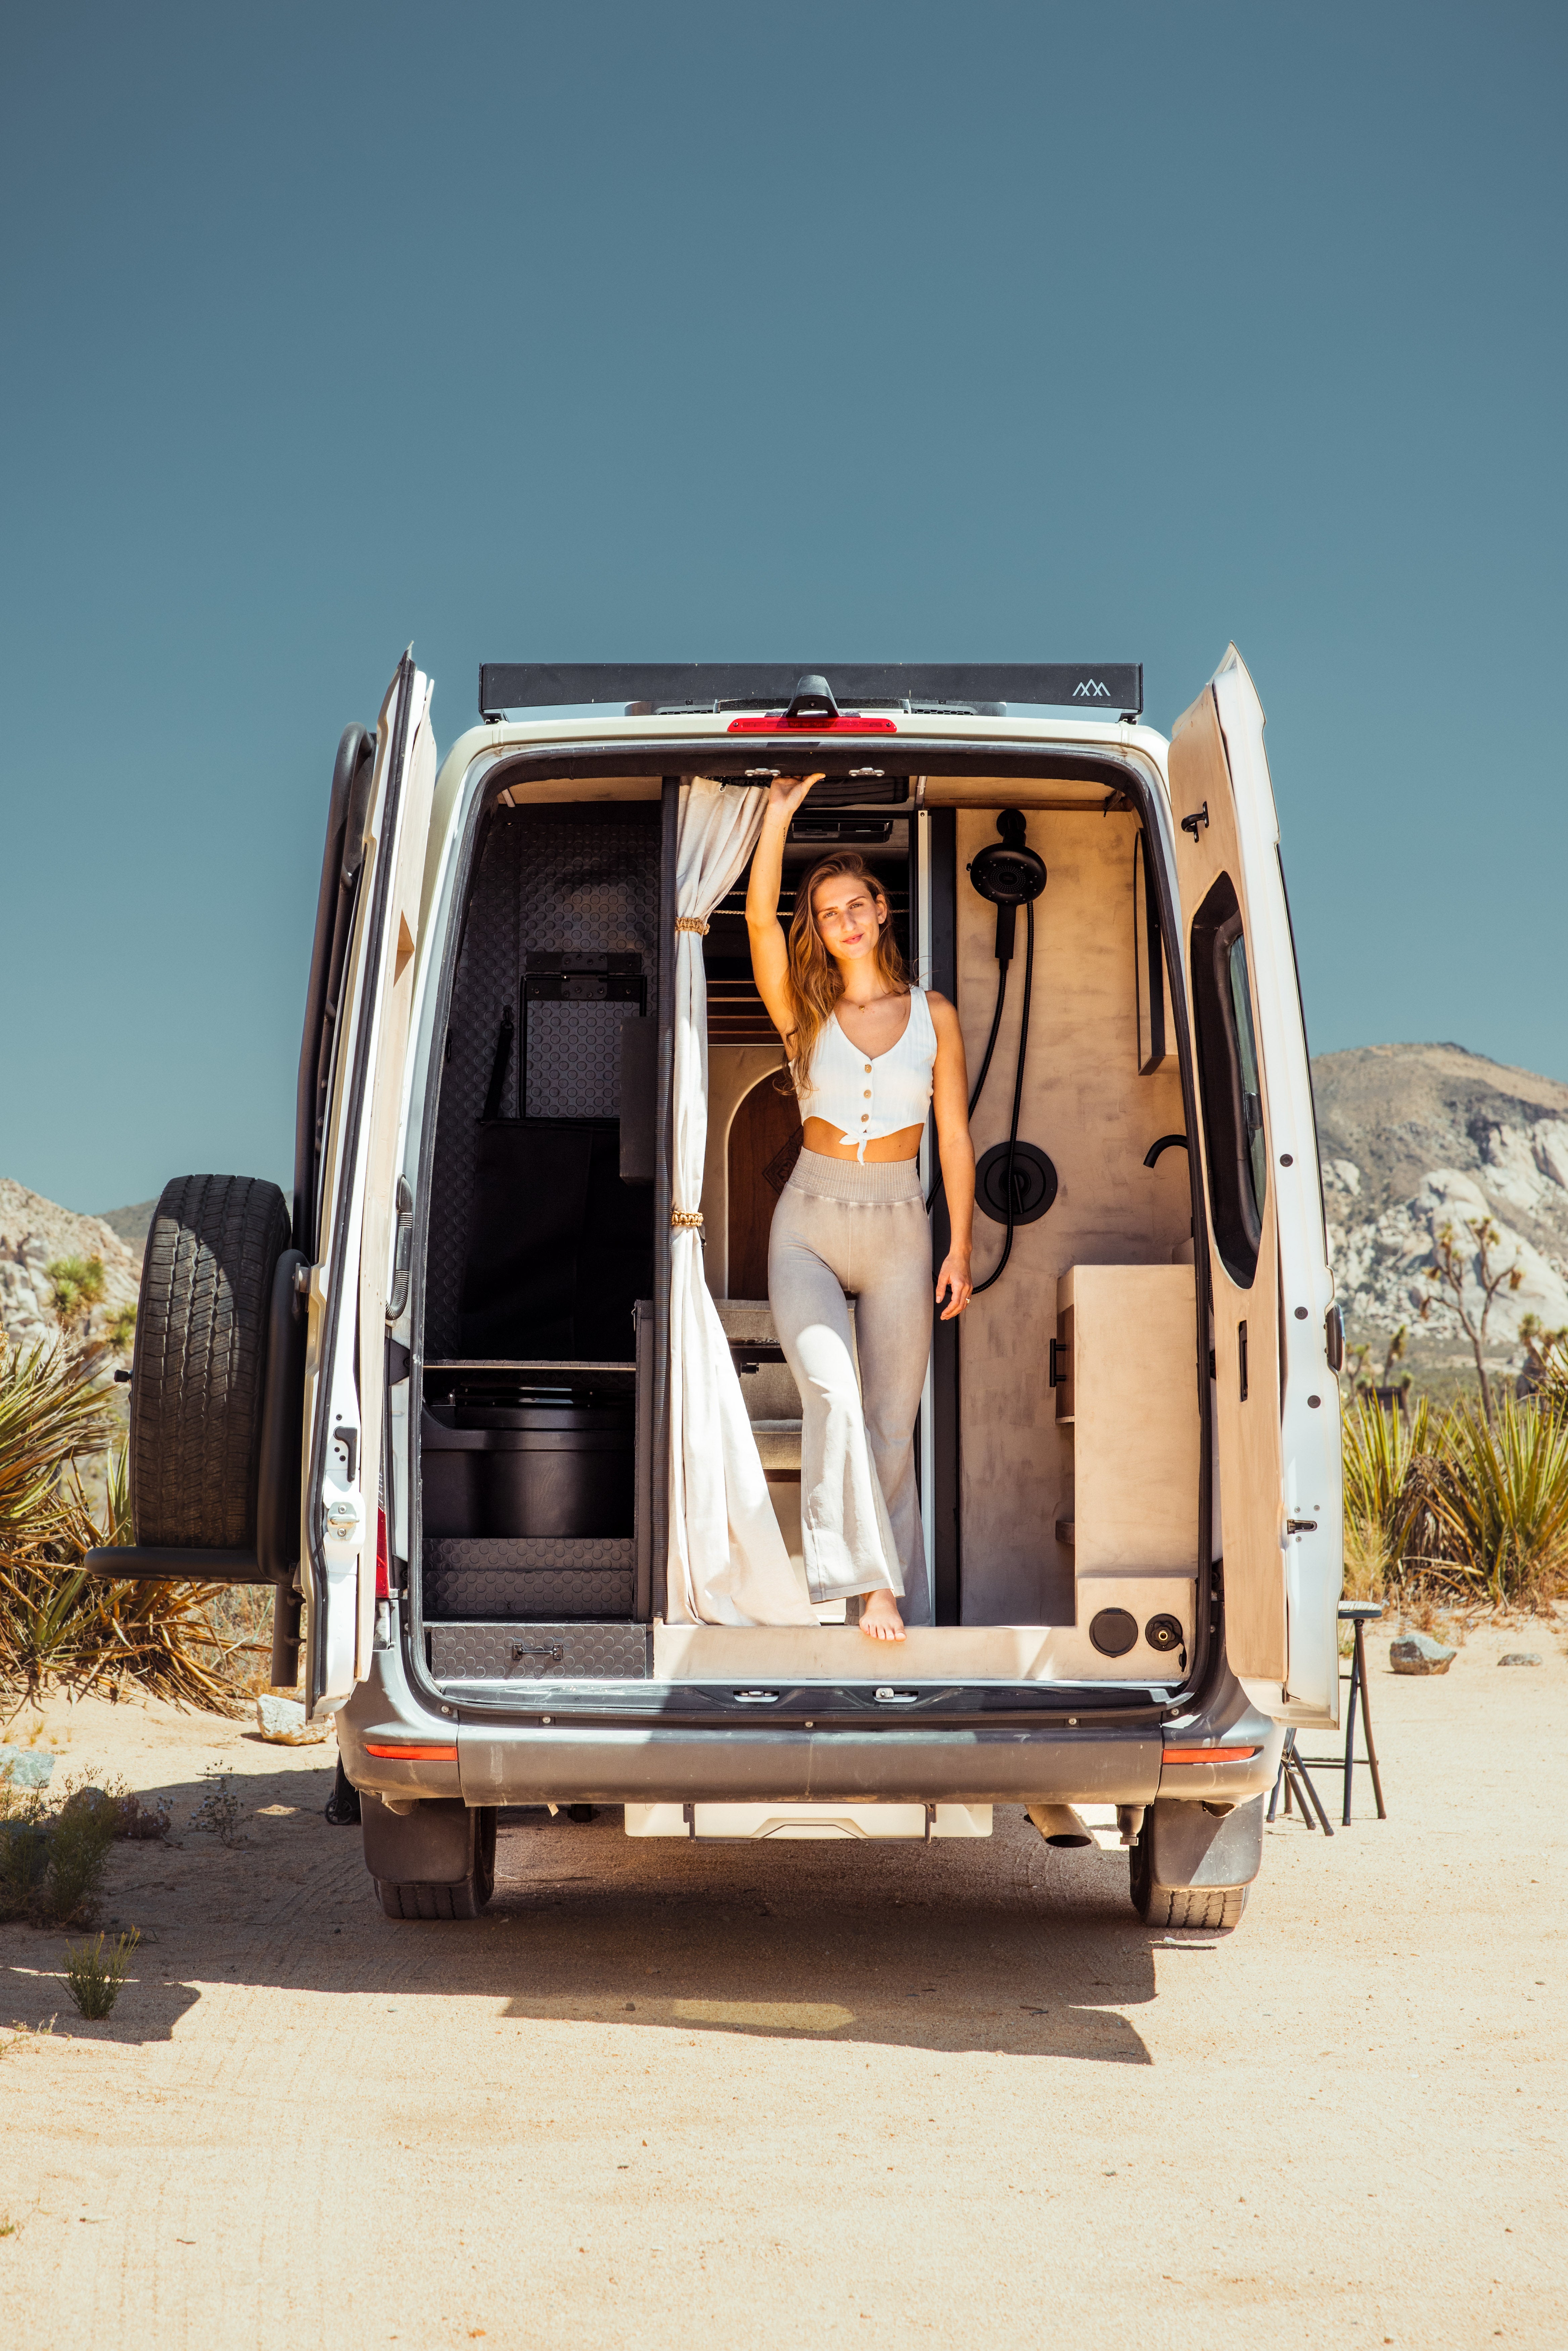 The #vanlife dream is set to go mainstream as more young people reject the nine-to-five workplace